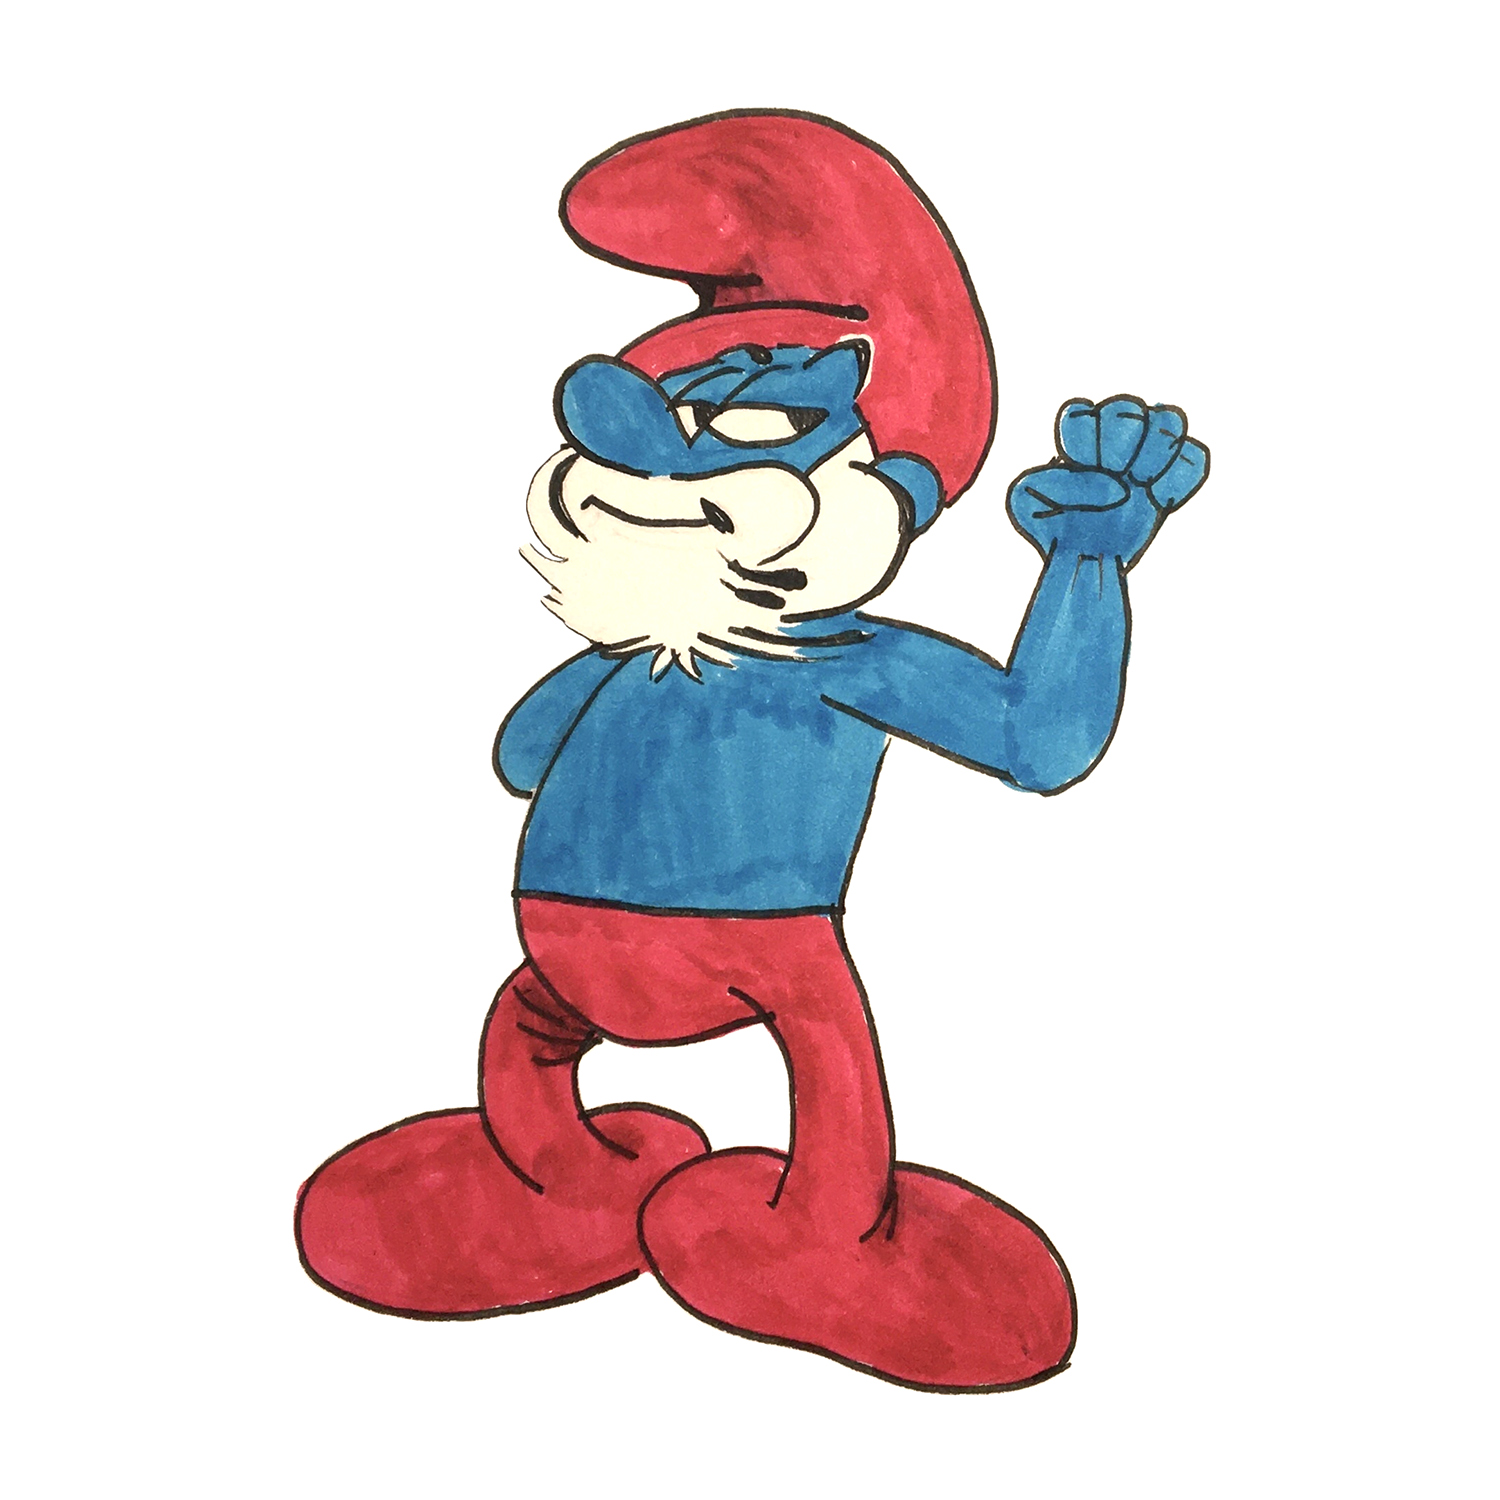 An illustration of the cartoon character Papa Smurf, a character with a blue body, white beard, red pants and red toque. In this picture he is raising his fist in solidarity in the way that activists do at rallies.